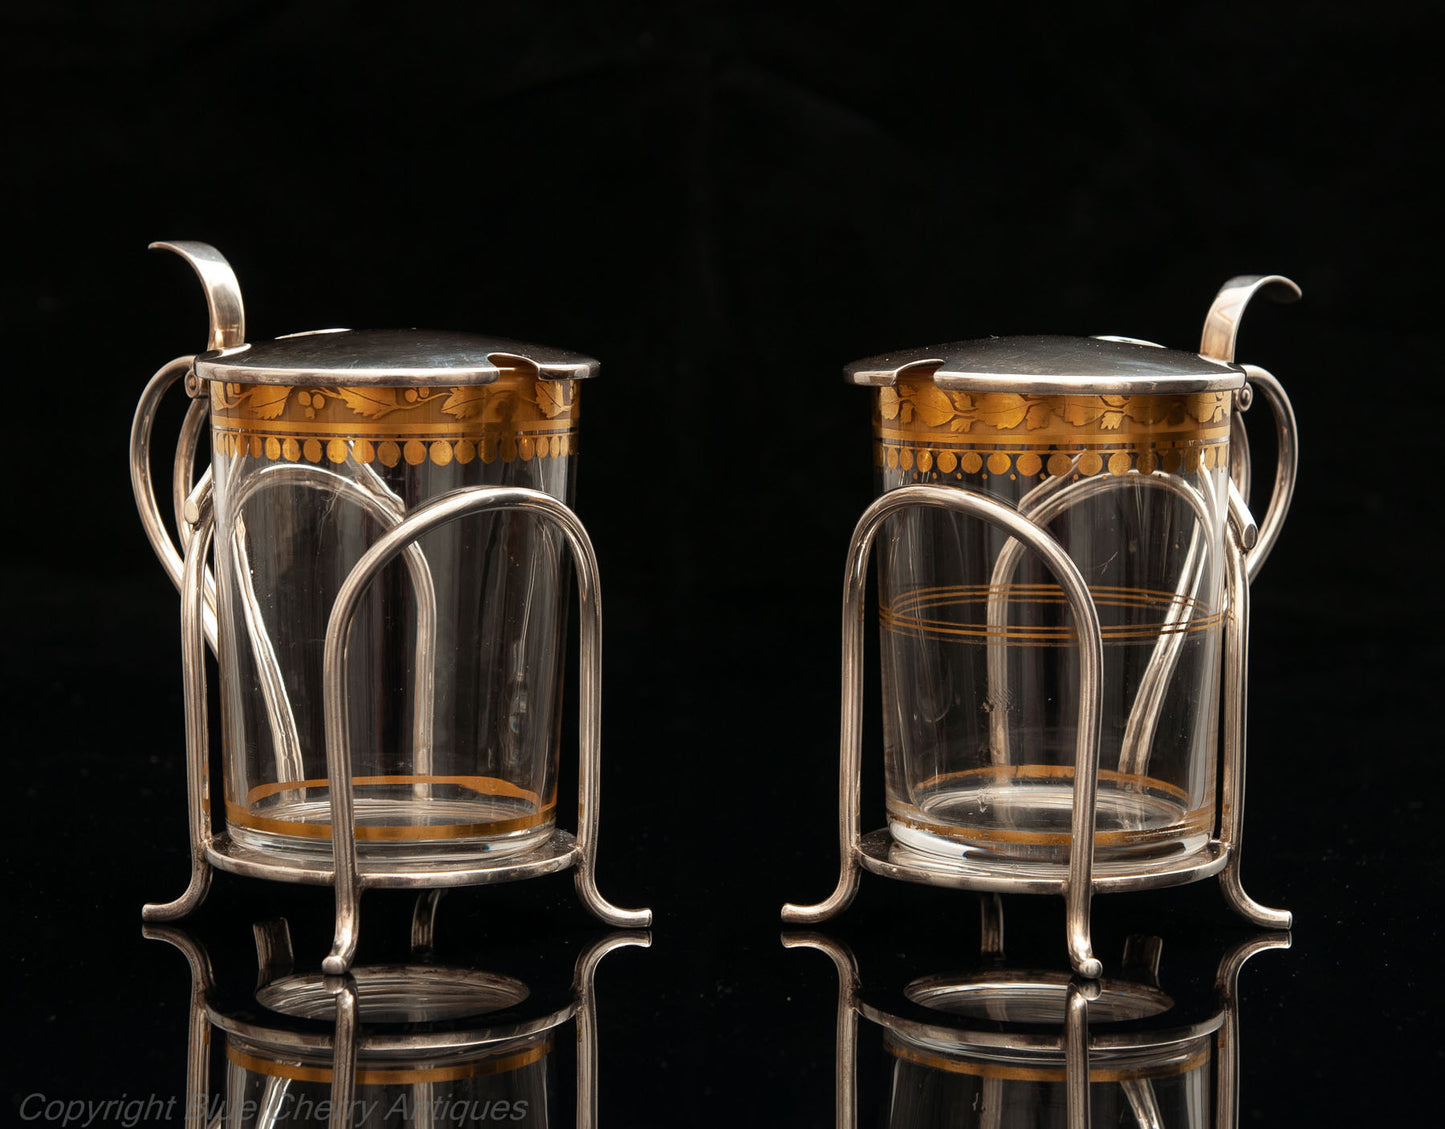 Fine & Rare Pair of Hukin & Heath Silver & Gilt Glass Hot Toddy Cups London 1907 (Code 1637)